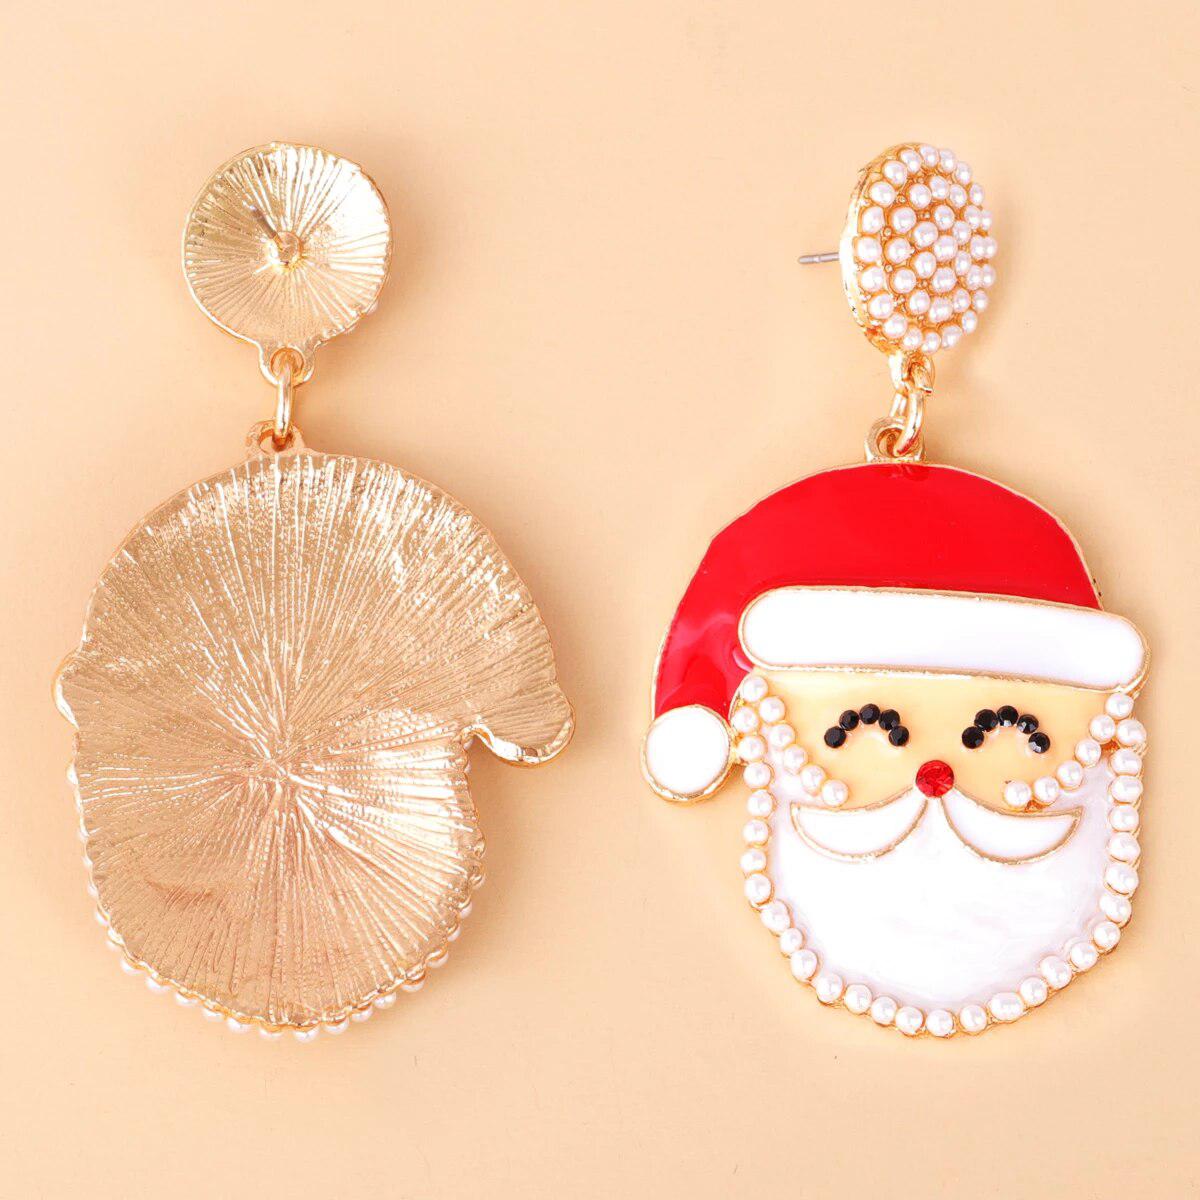 Our gorgeous pearl detailed Santa with stud backing. Let's make your festive outfit pop!